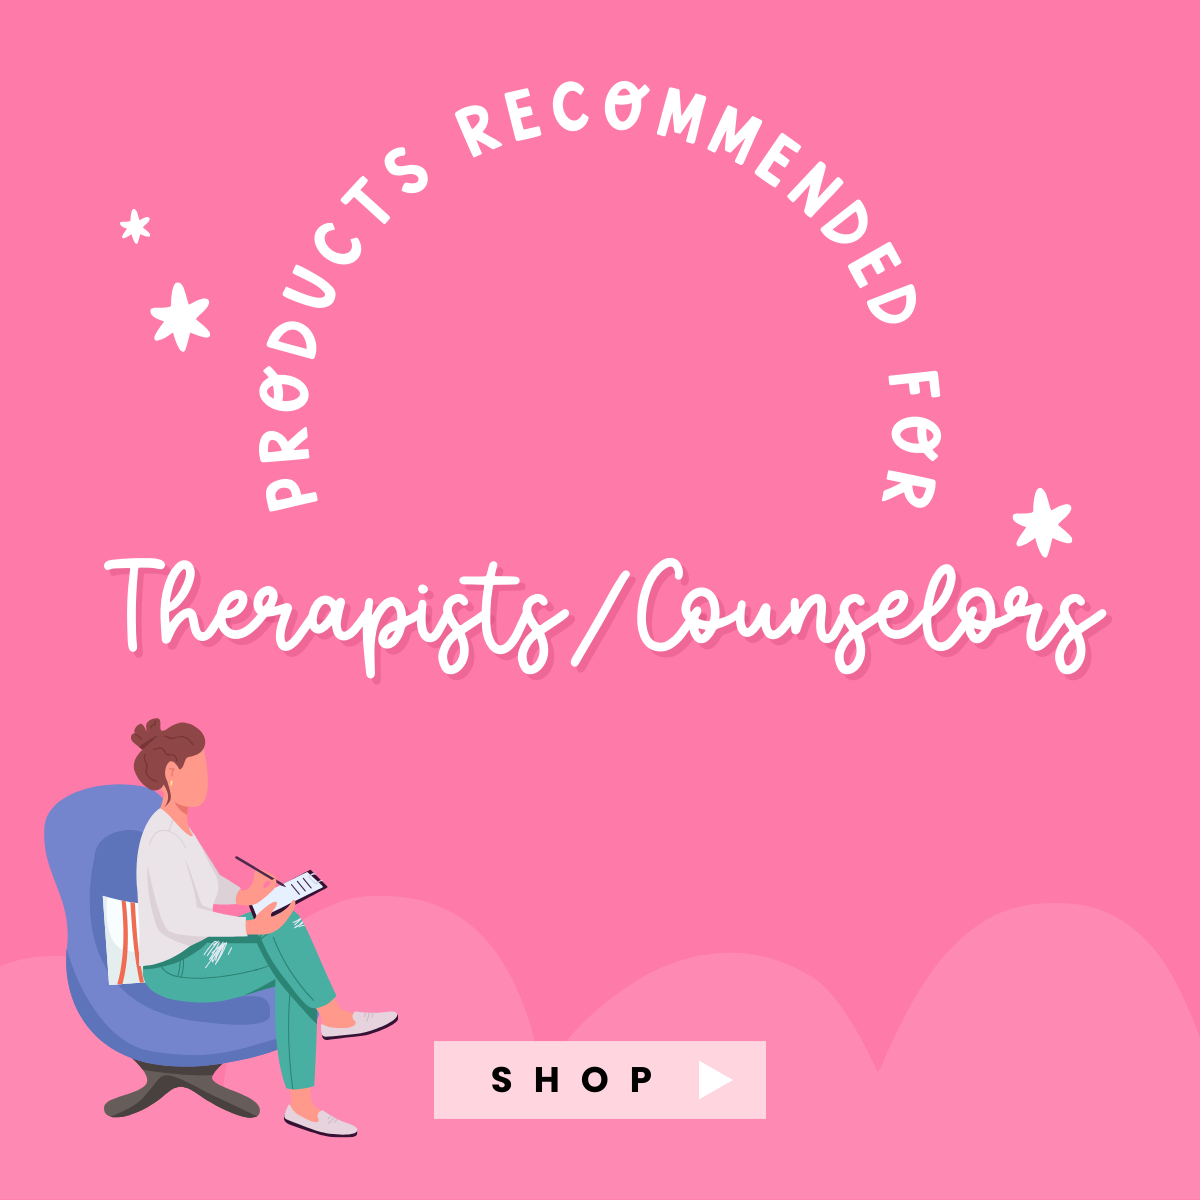 Products Recommended for Therapist/Counselors